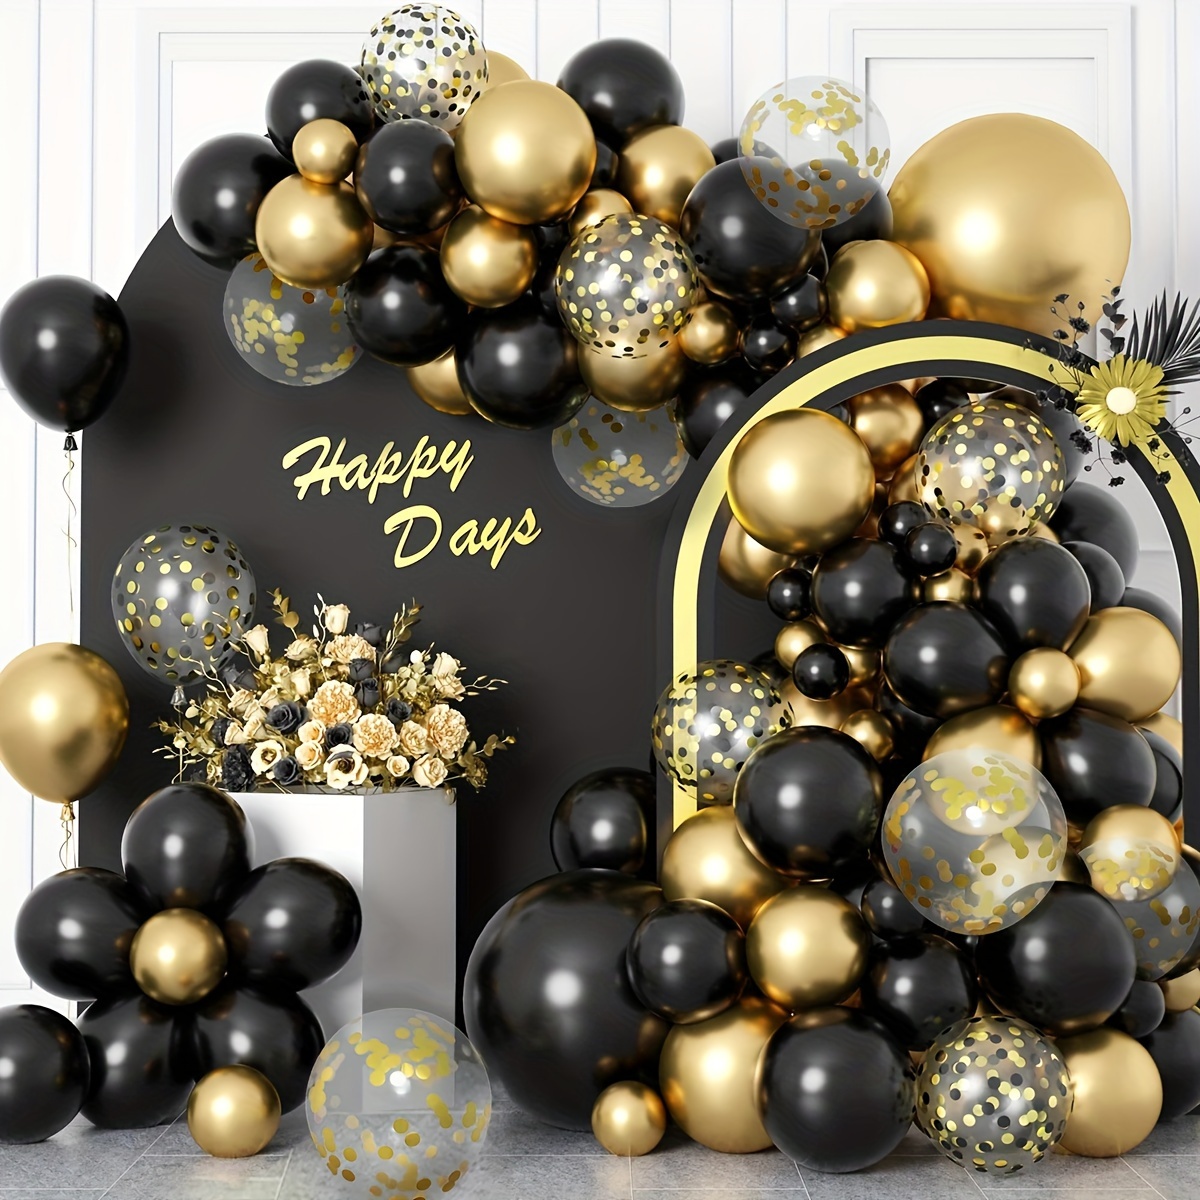 Black Gold Birthday Decorations, Black & Gold Party Decorations with Happy  Birthday Banner, Chrome Silver Confetti Latex Balloons, Champagne Crown  Foil Balloon for Birthday Party Supplies 